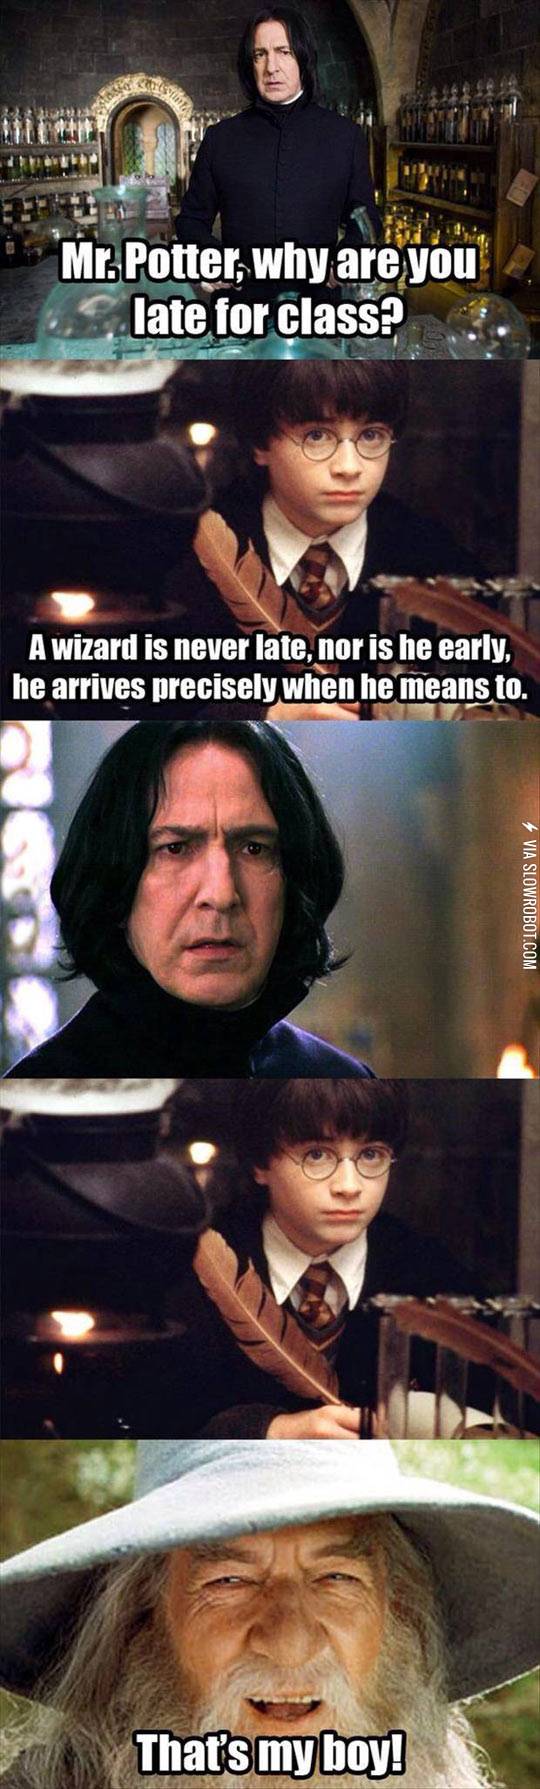 Wizards+are+never+late